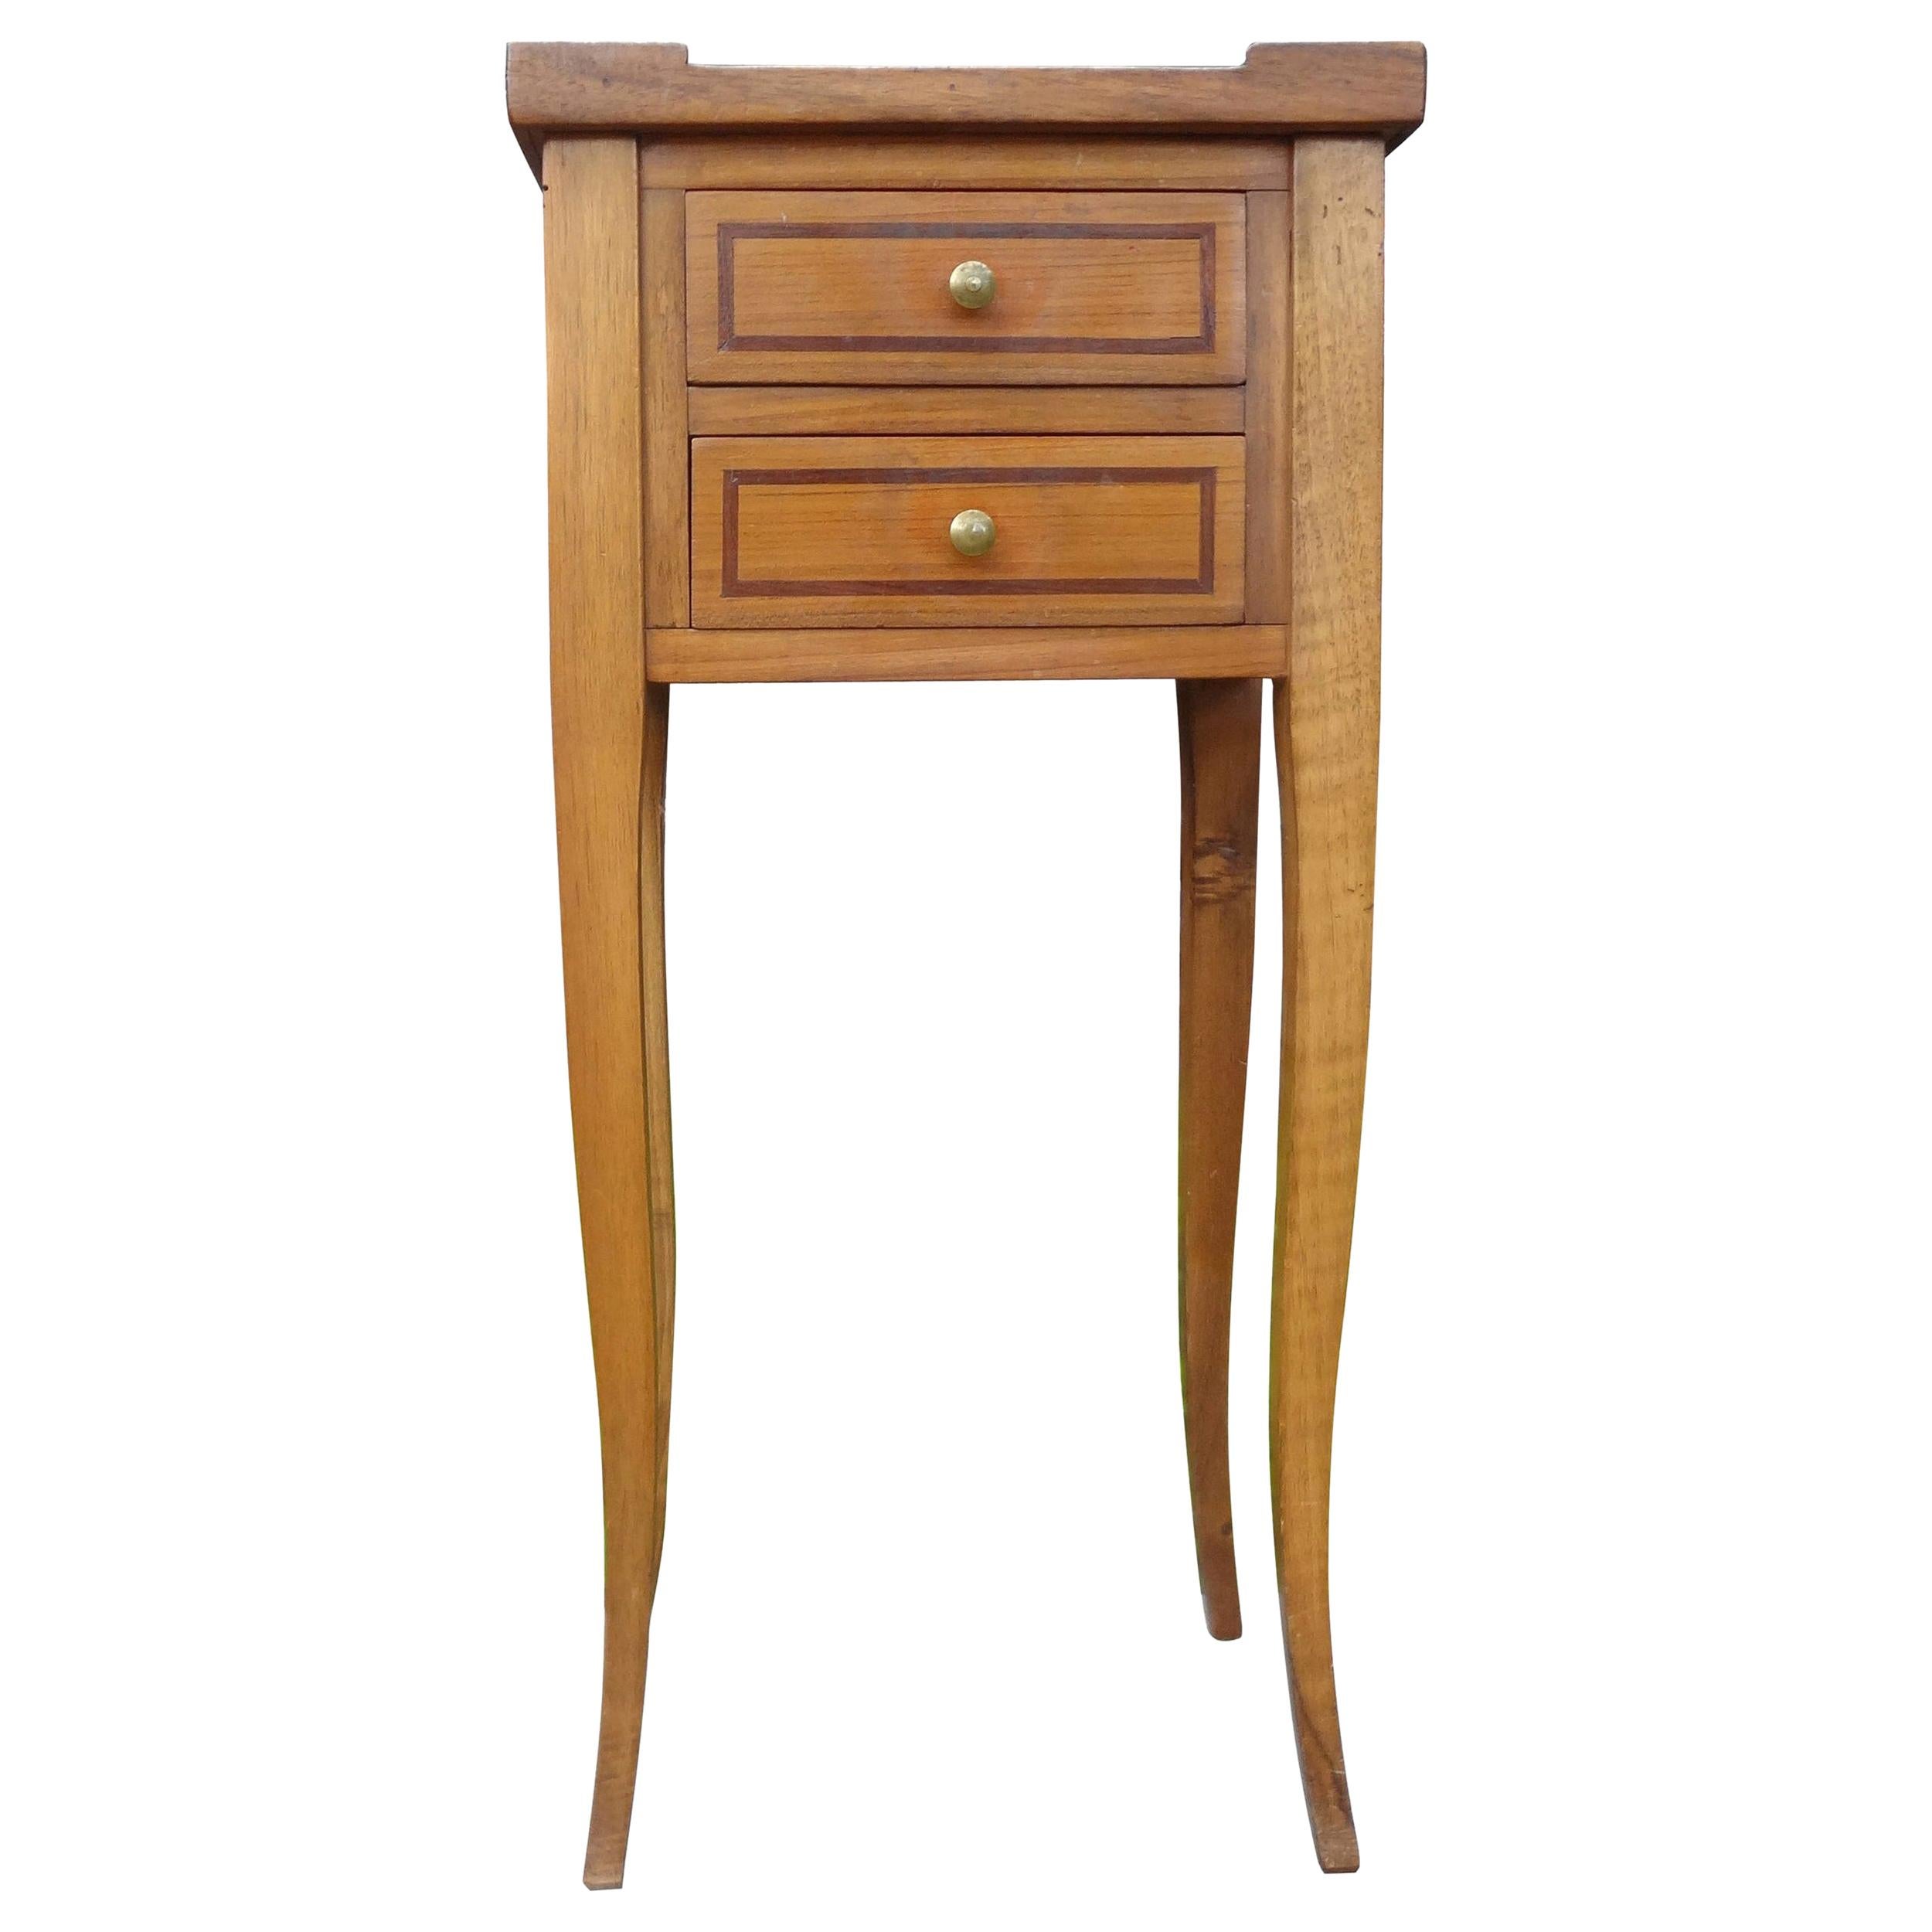 French Louis XVI Style Fruitwood Table or Nightstand